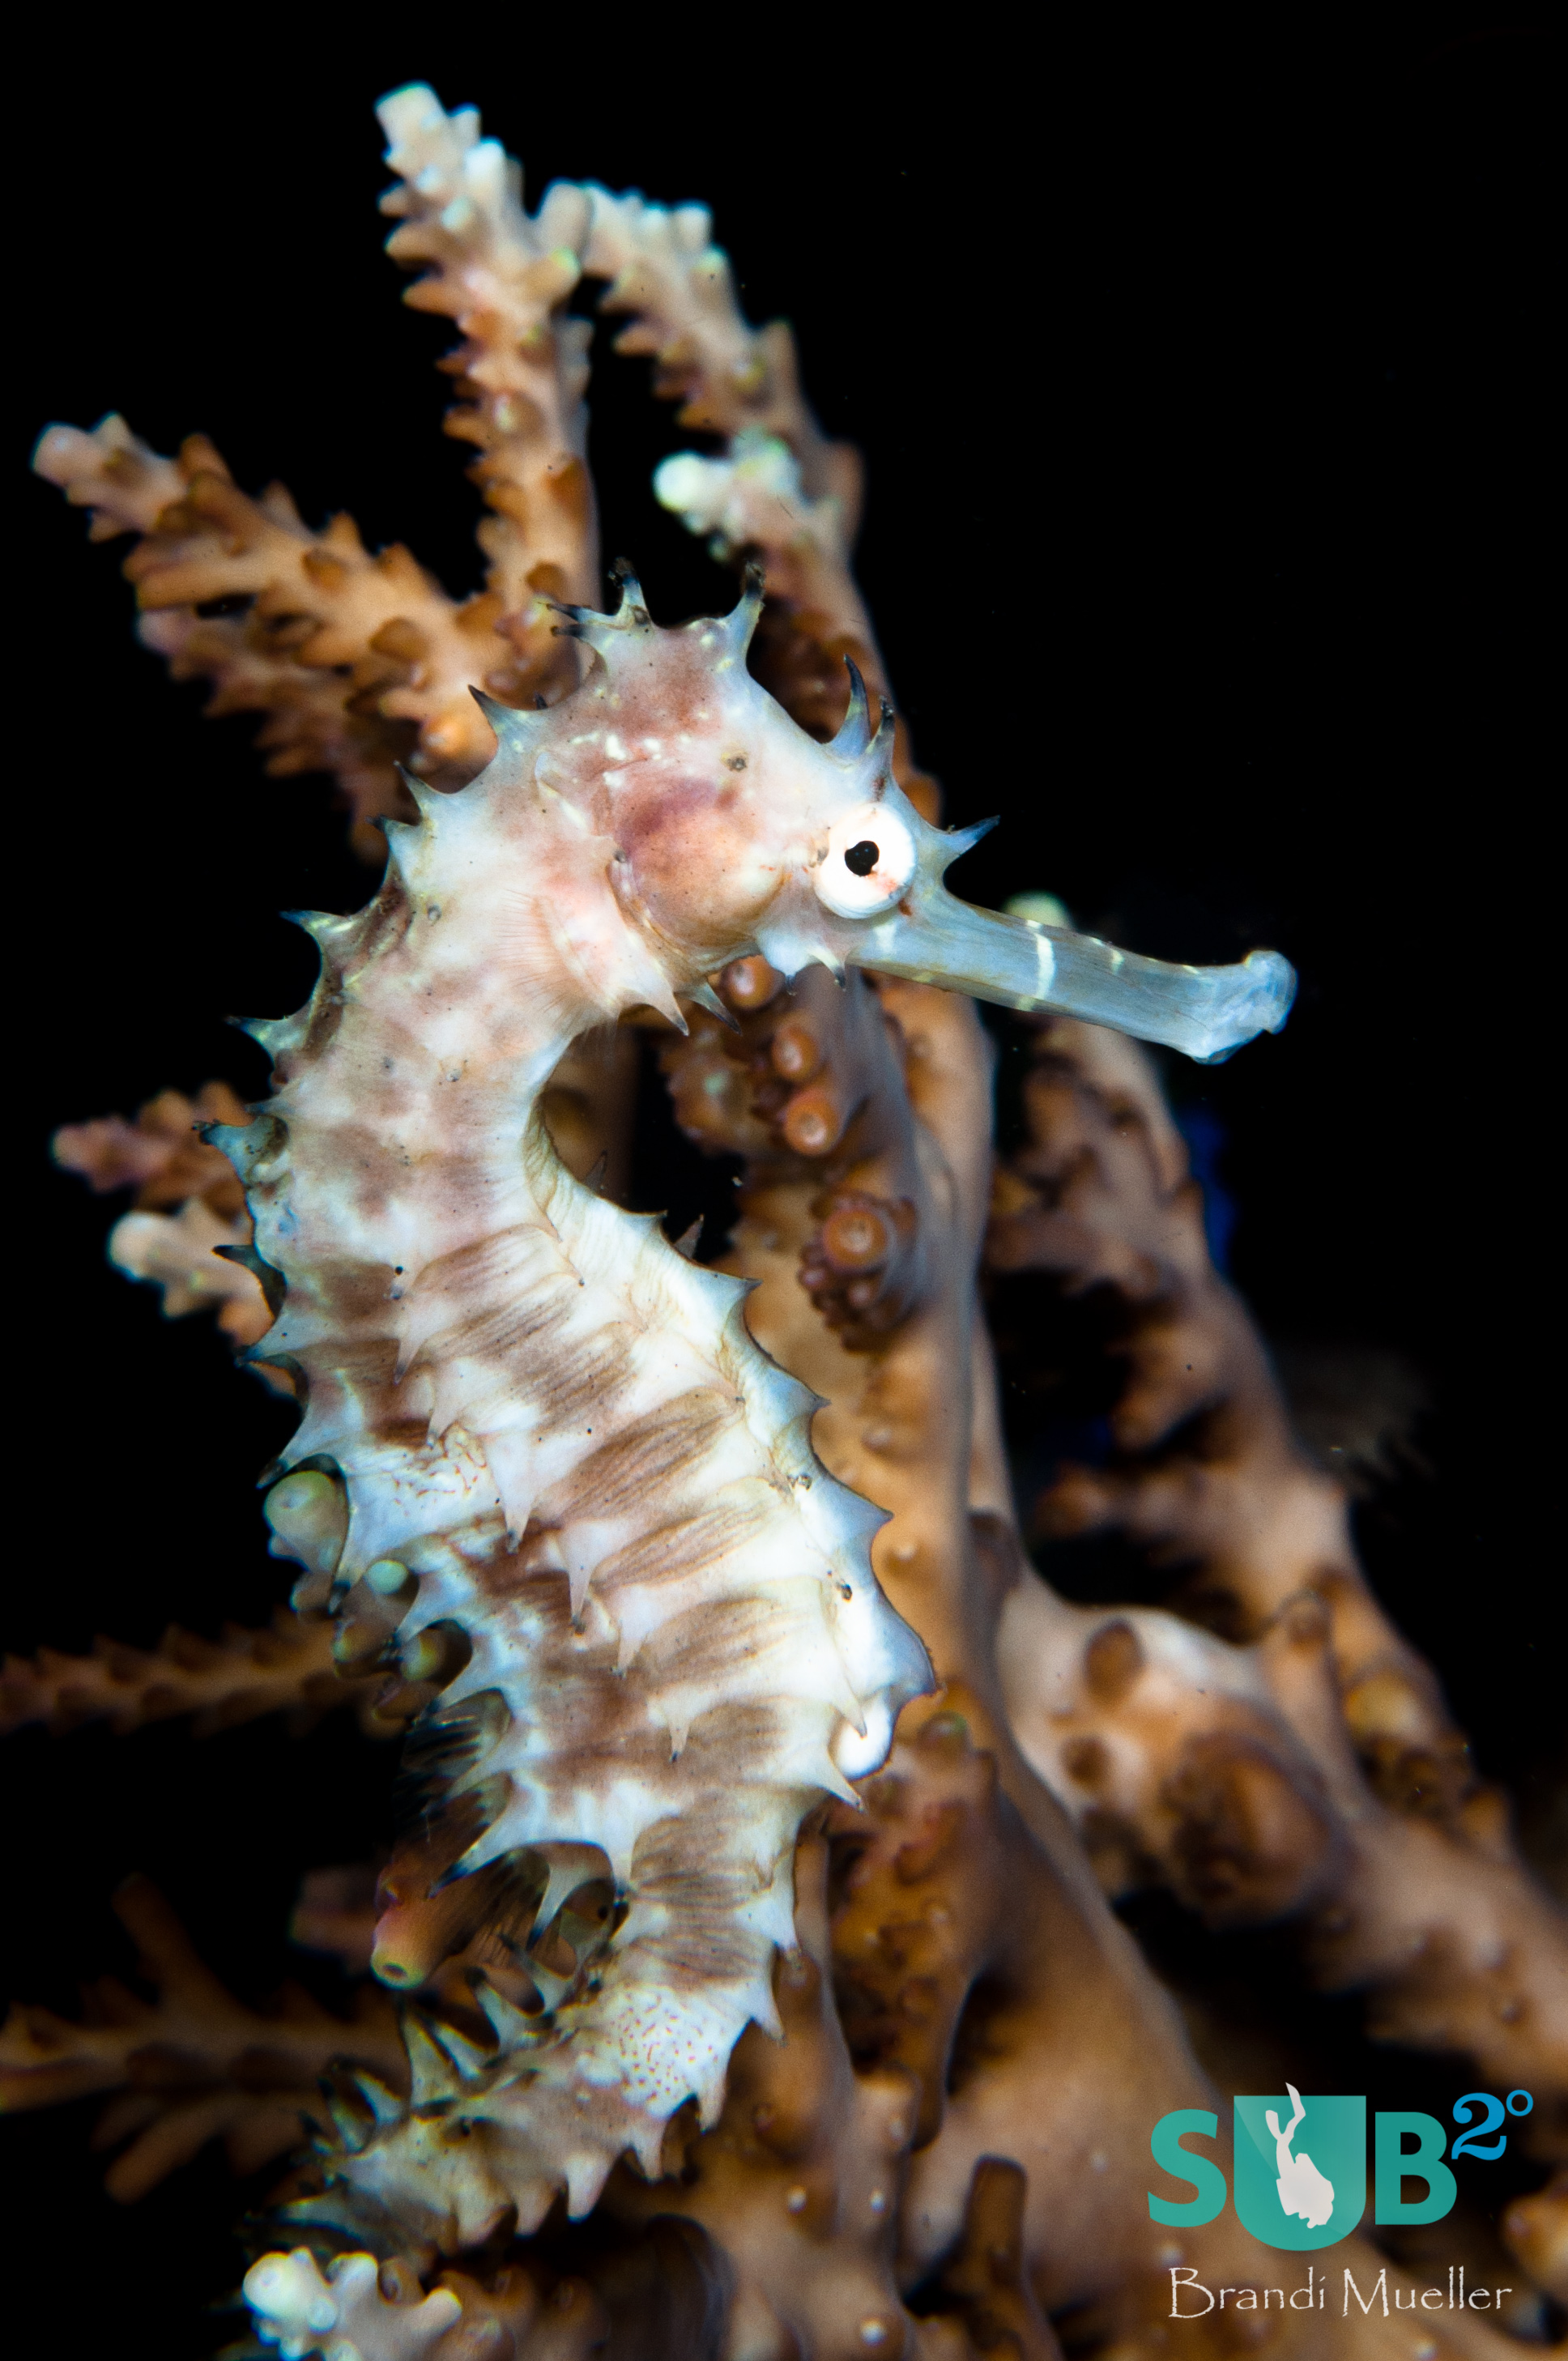 A thorny seahorse tries to blend in with surrounding hard coral.